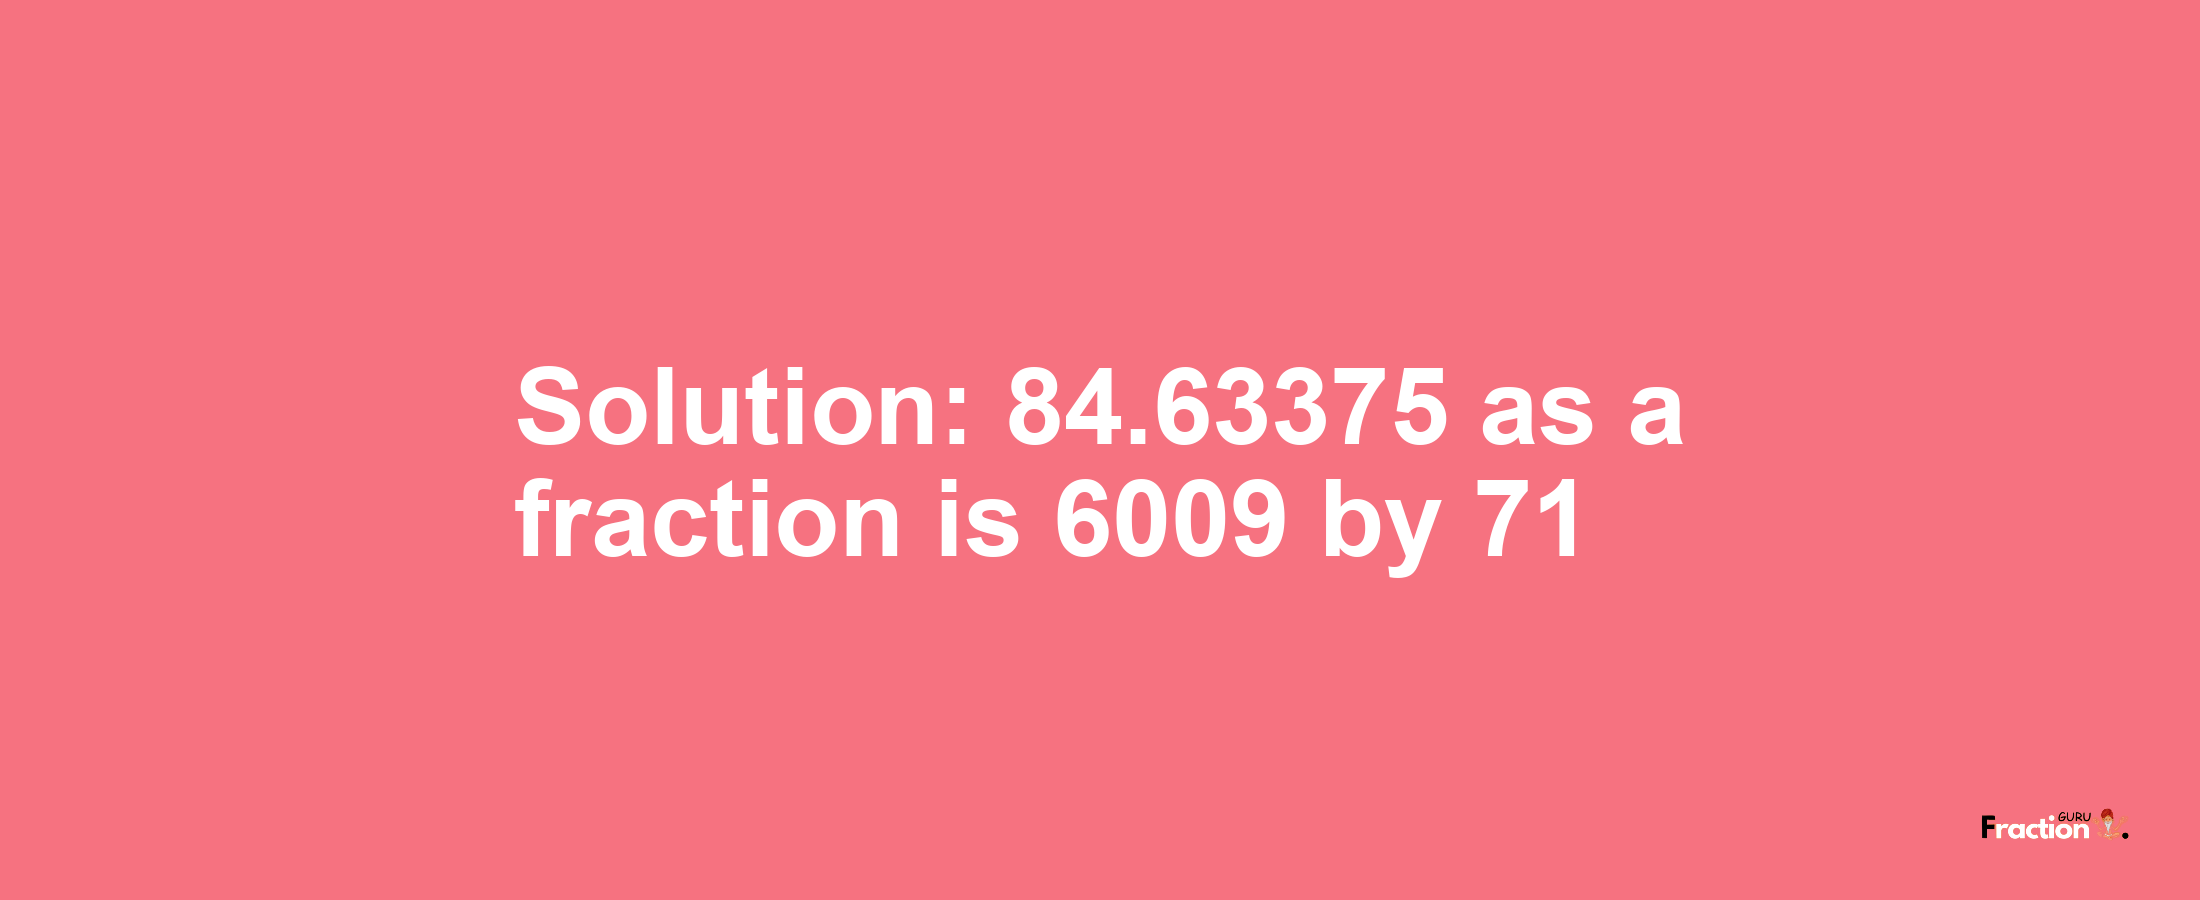 Solution:84.63375 as a fraction is 6009/71